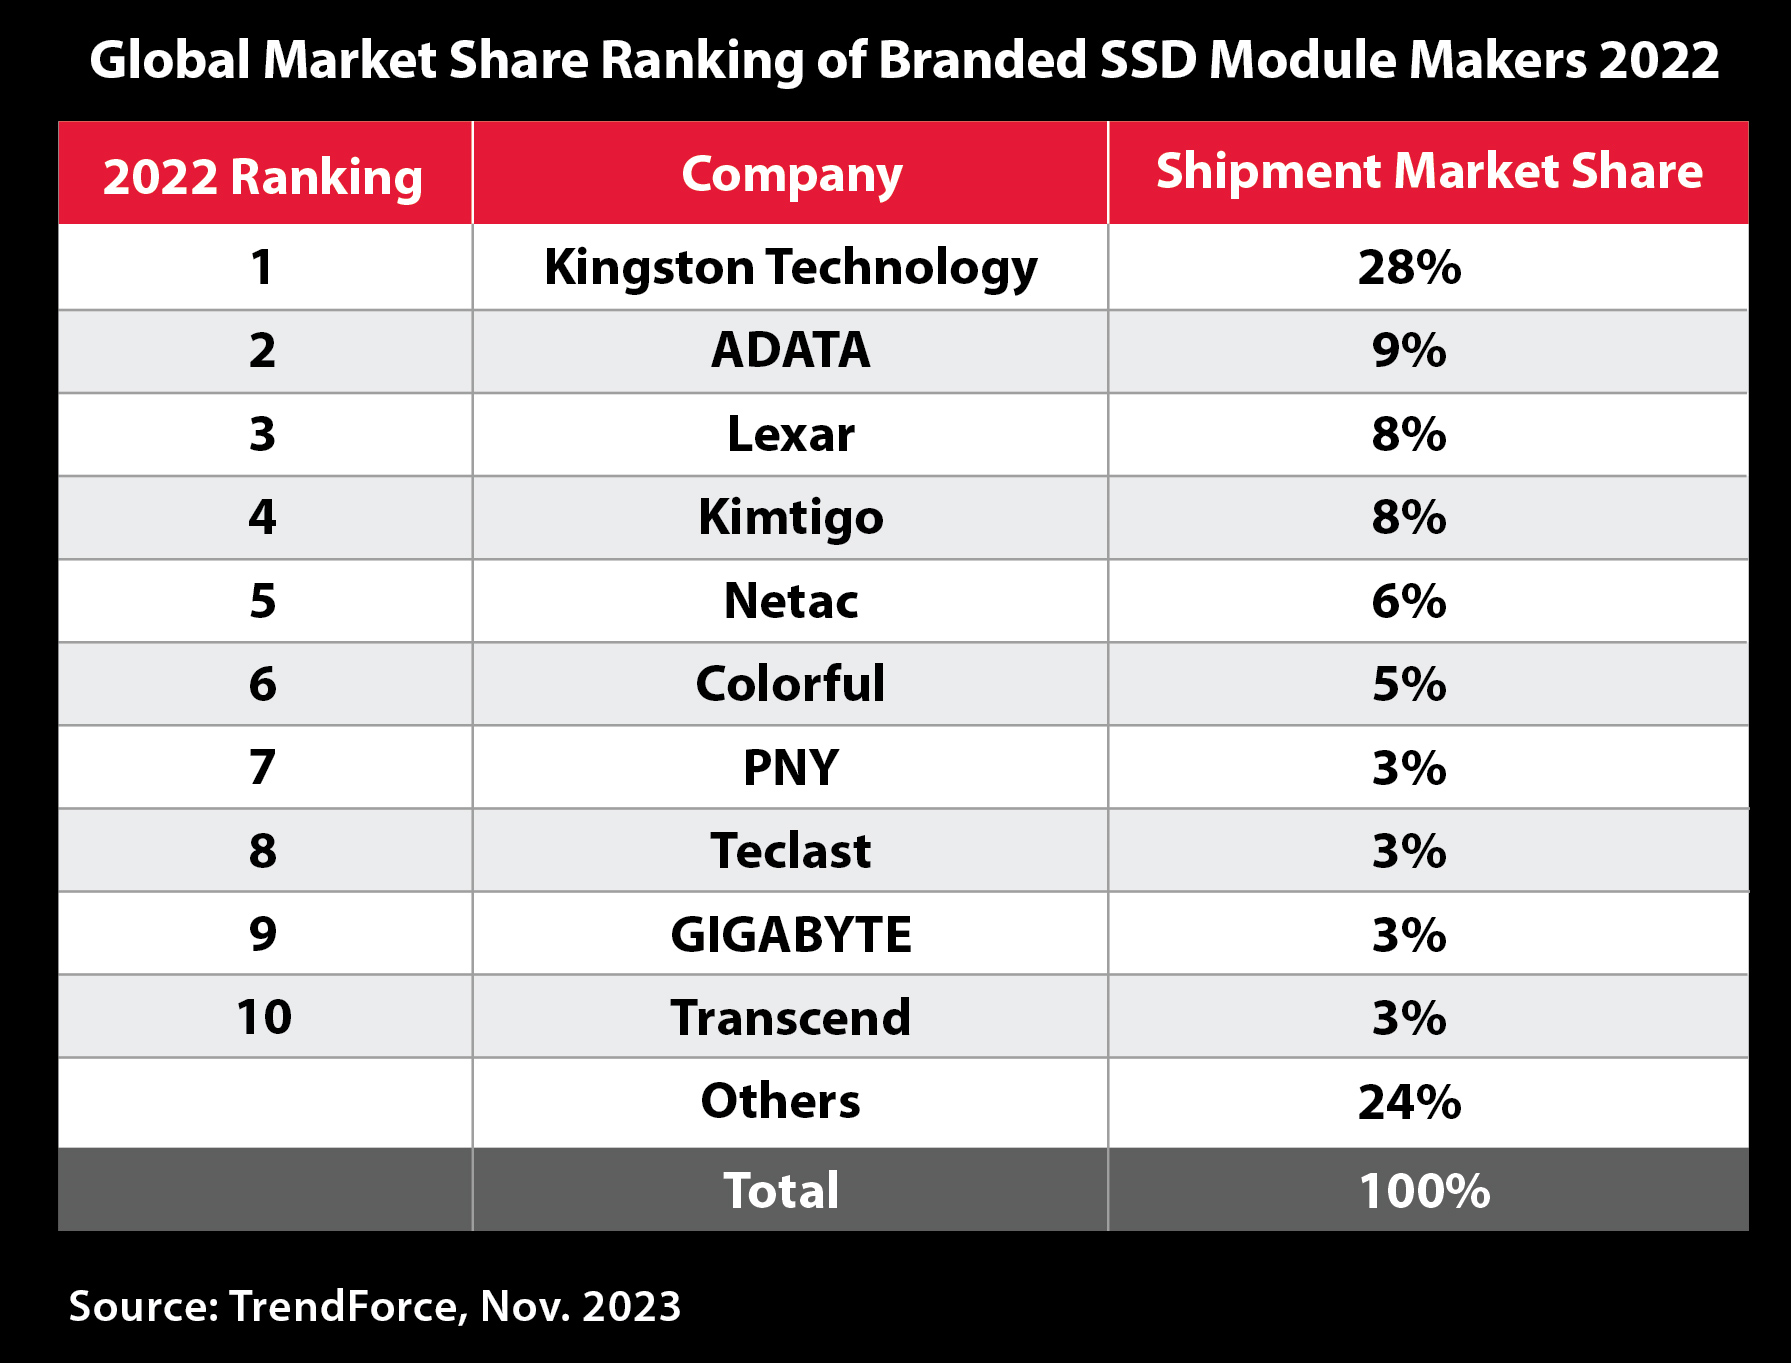 Kingston Leads Channel SSD Shipments for the 6th Consecutive Year